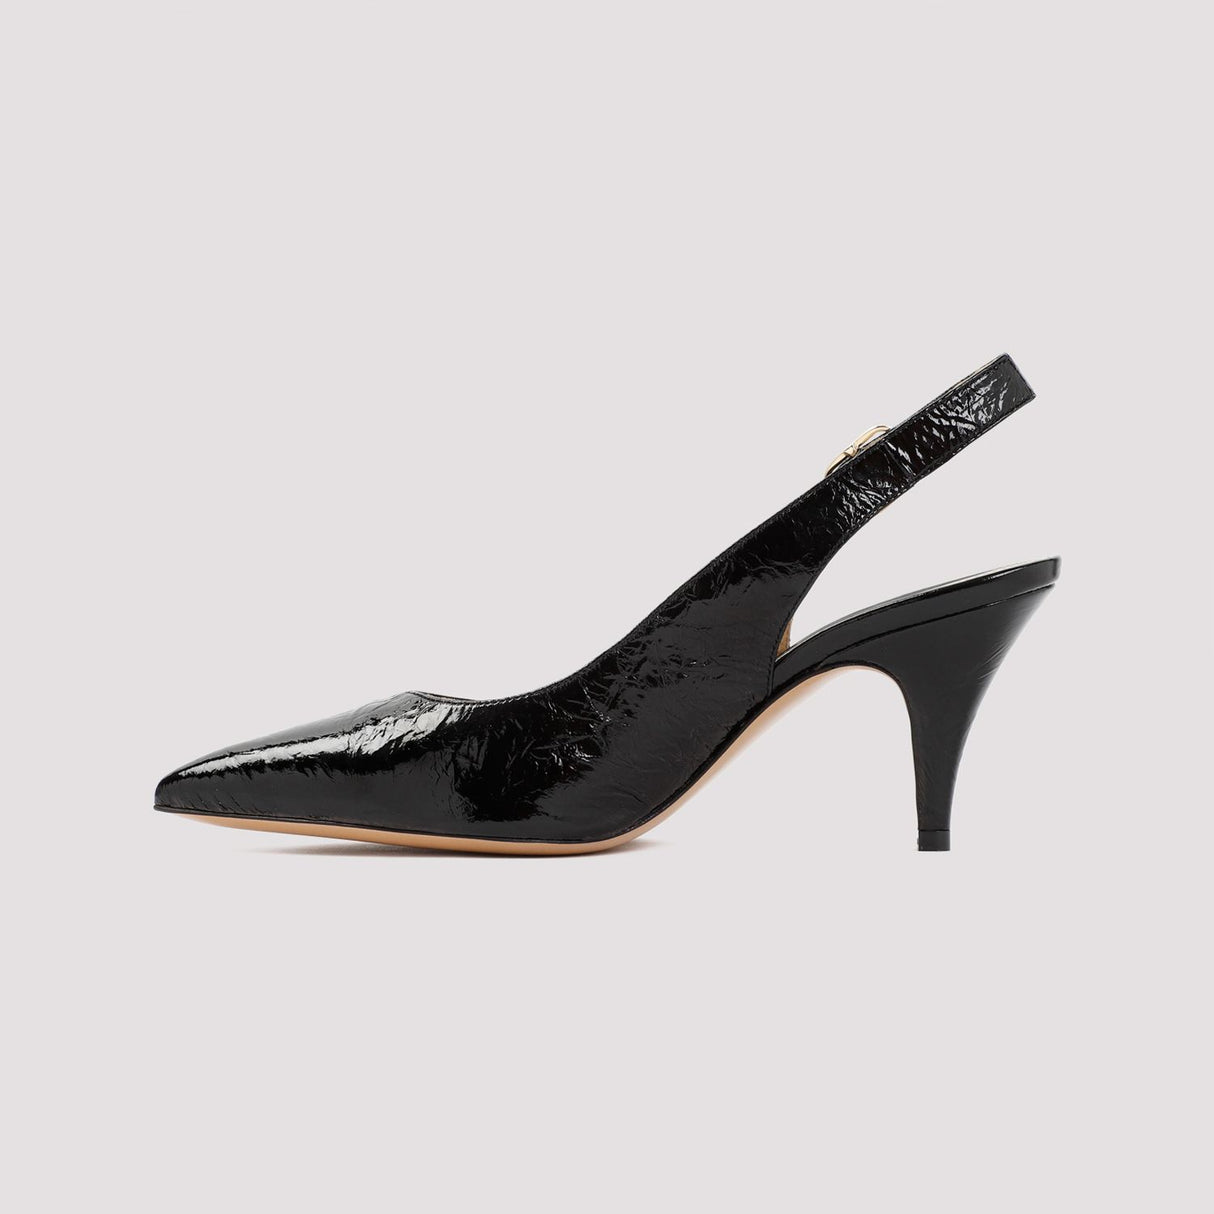 KHAITE Sleek and Chic: Black Leather Pumps for Women